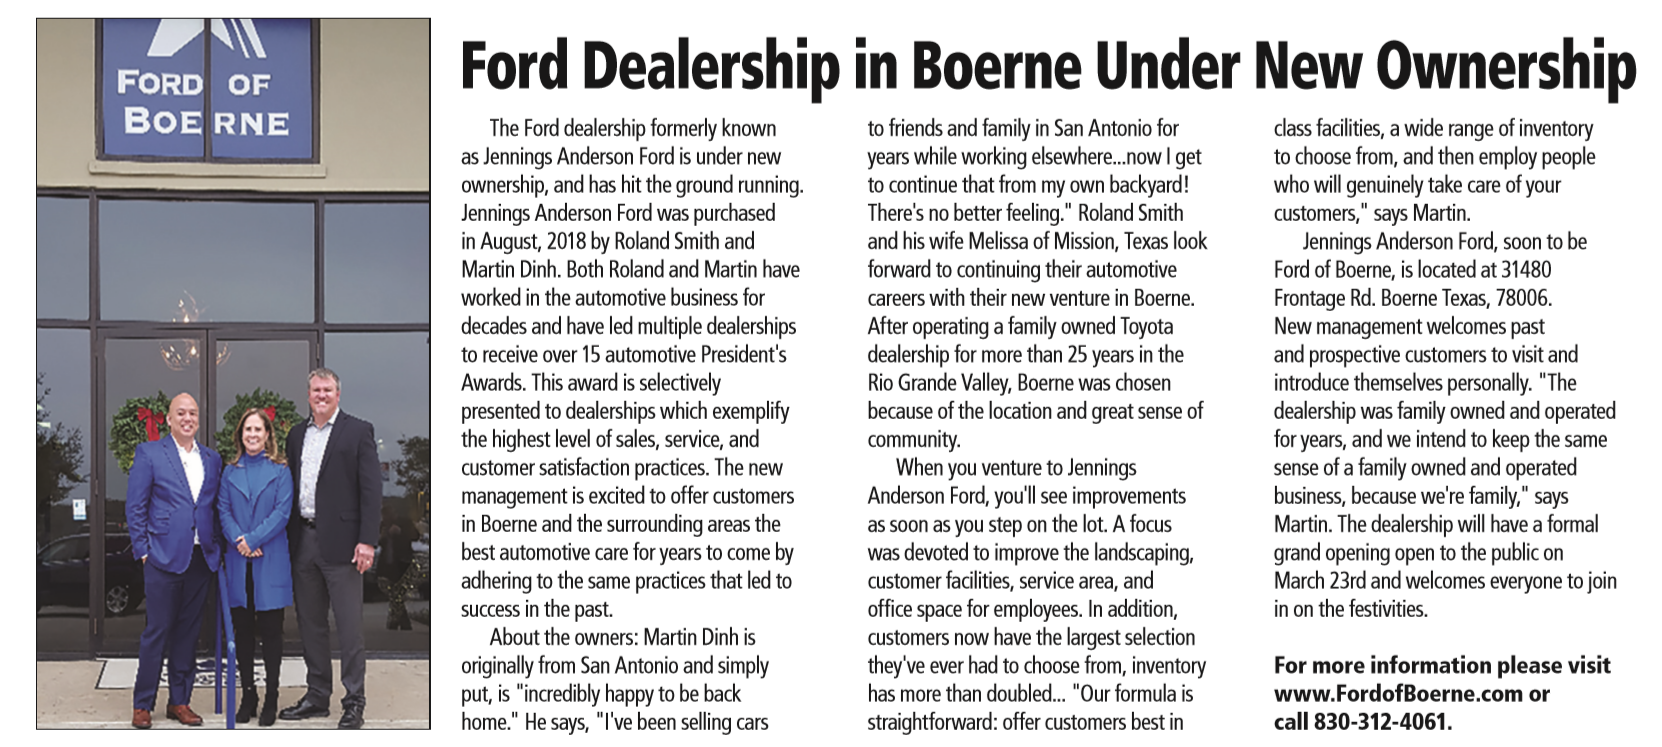 Ford of Boerne Making the News